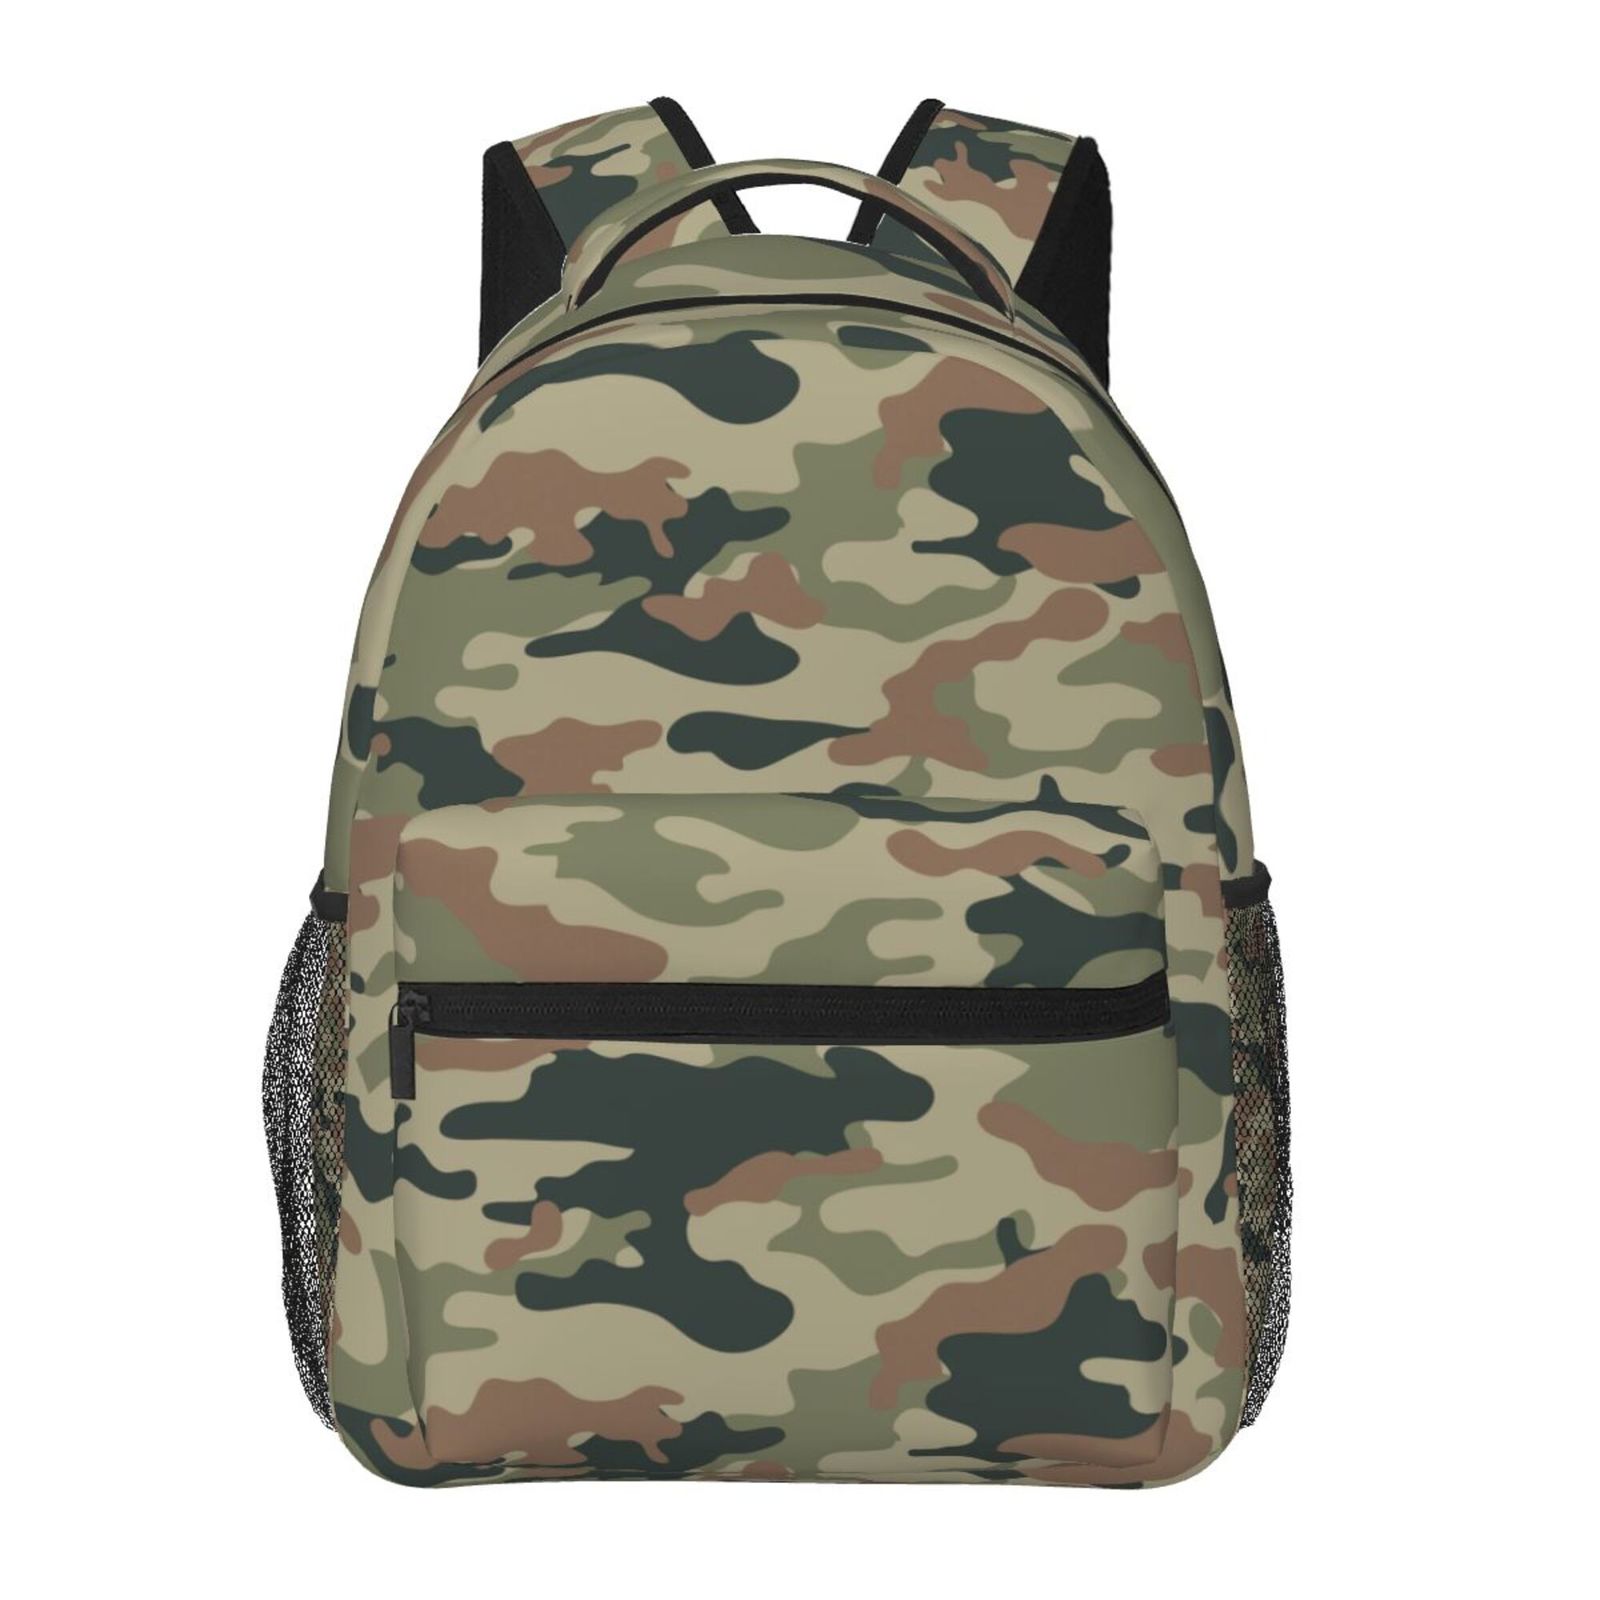 Primary image for Camouflage Camo school backpack back pack  bookbag  for boys  kids small daypack